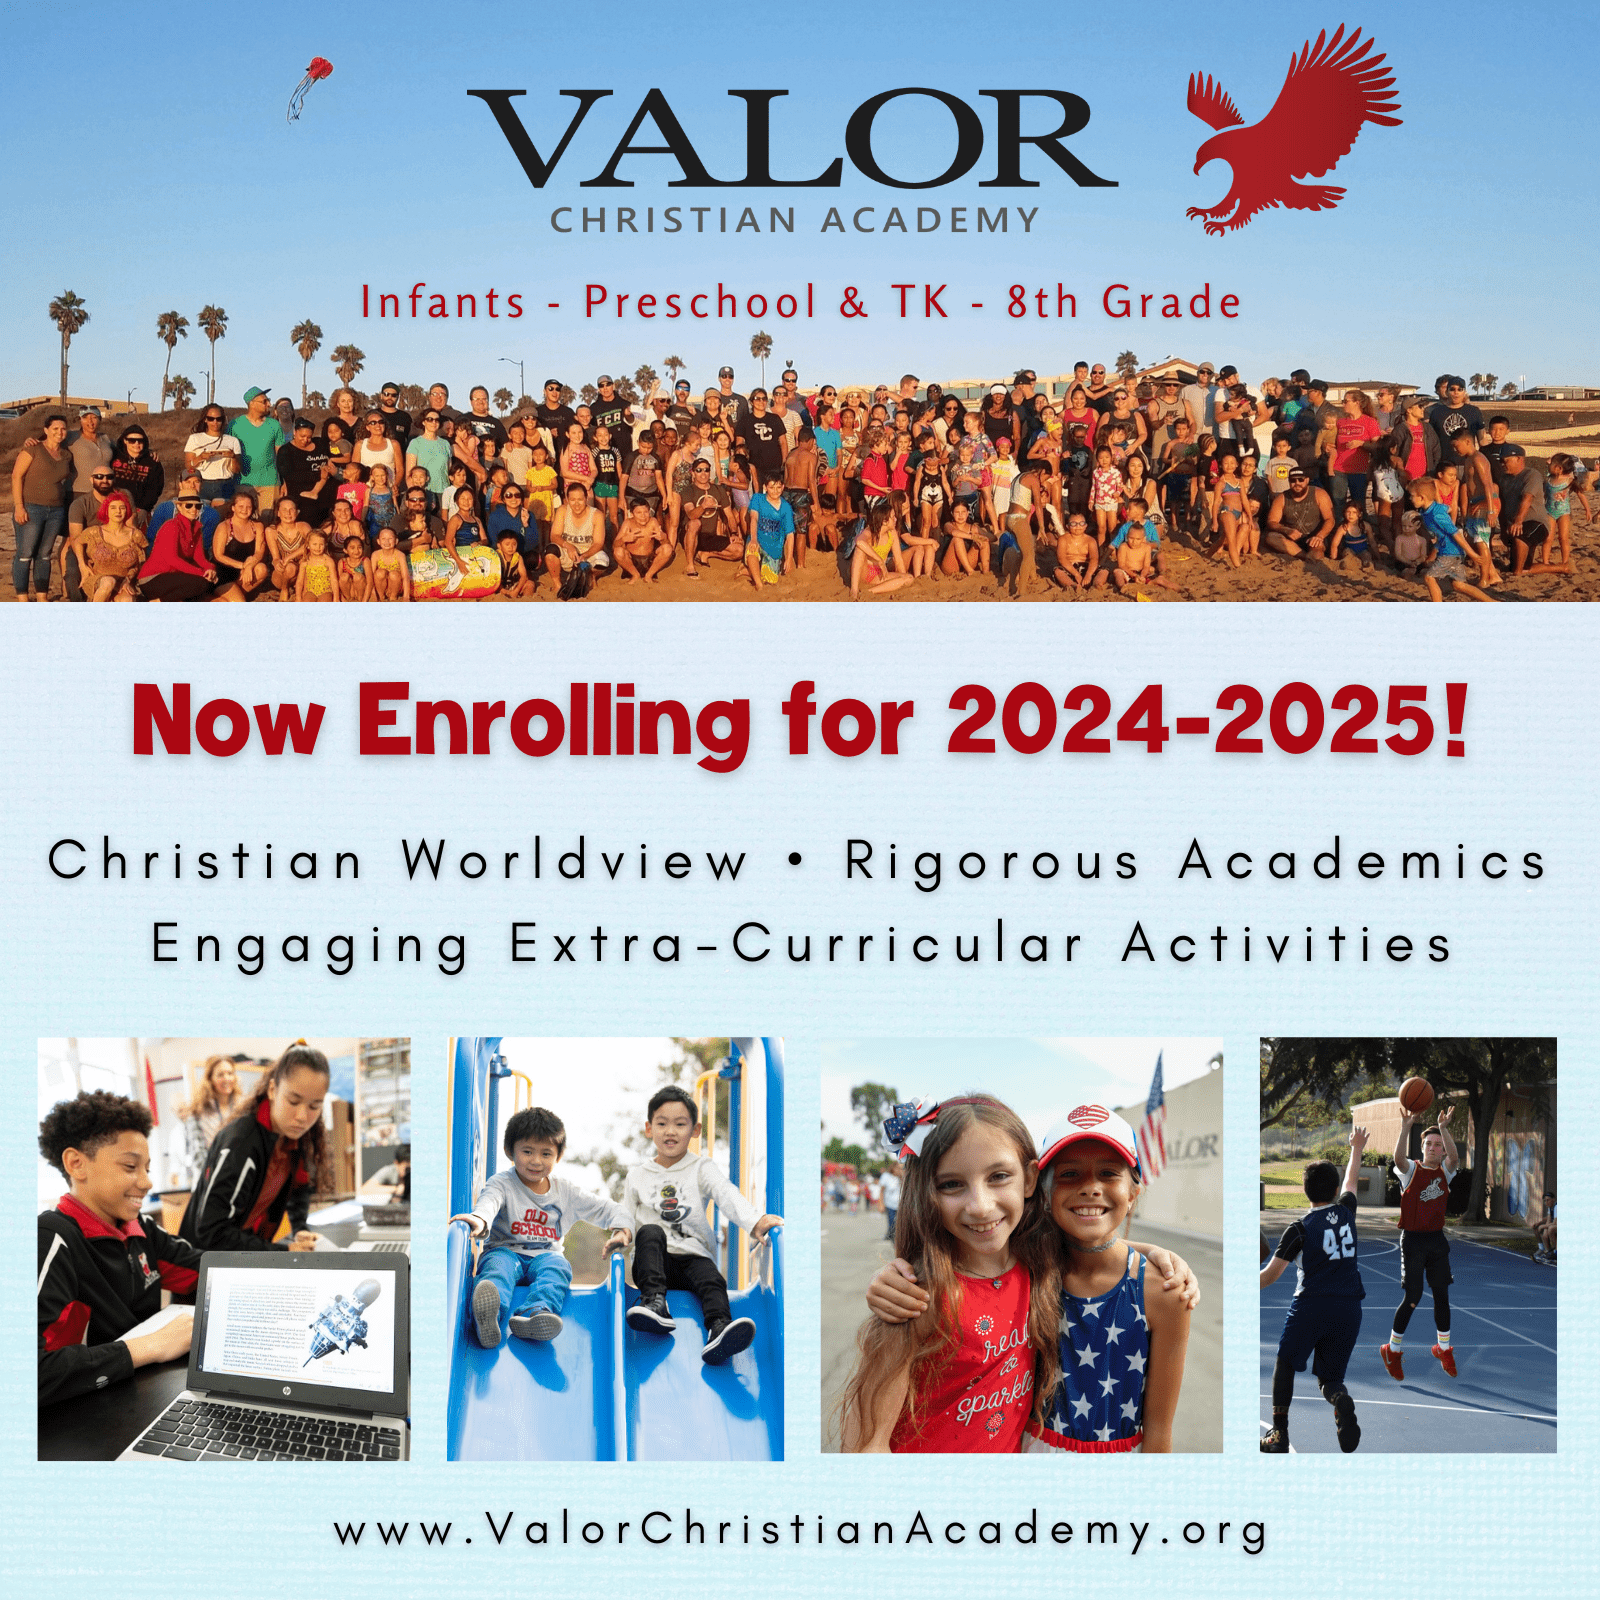 We are now enrolling at Valor Christian Academy for the 2024-2025 school year. Click banner to visit our Admissions webpage.